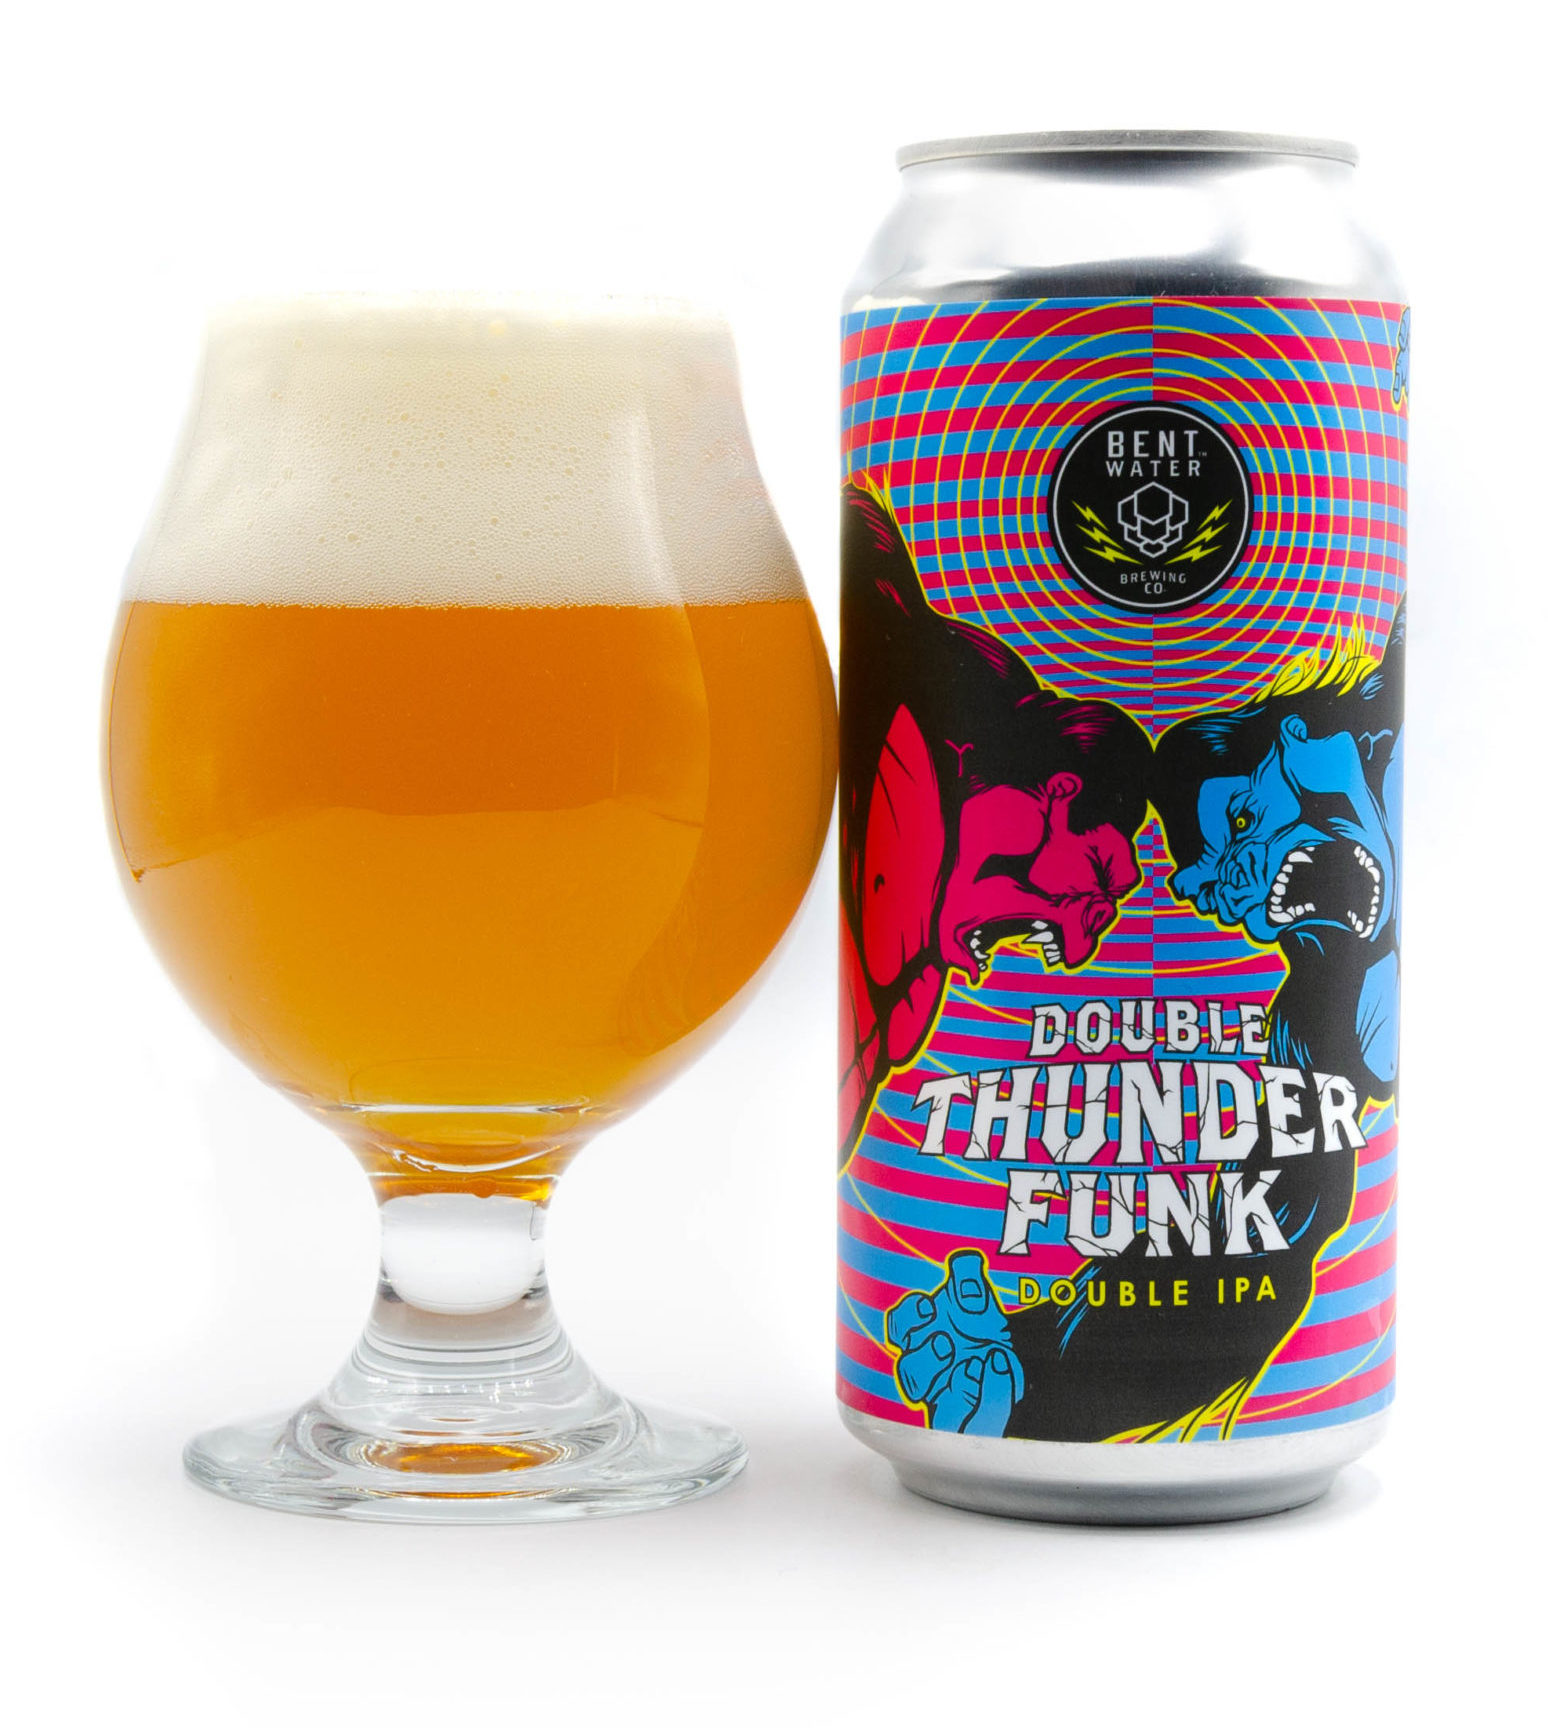 DOUBLE THUNDER FUNK beer image 1